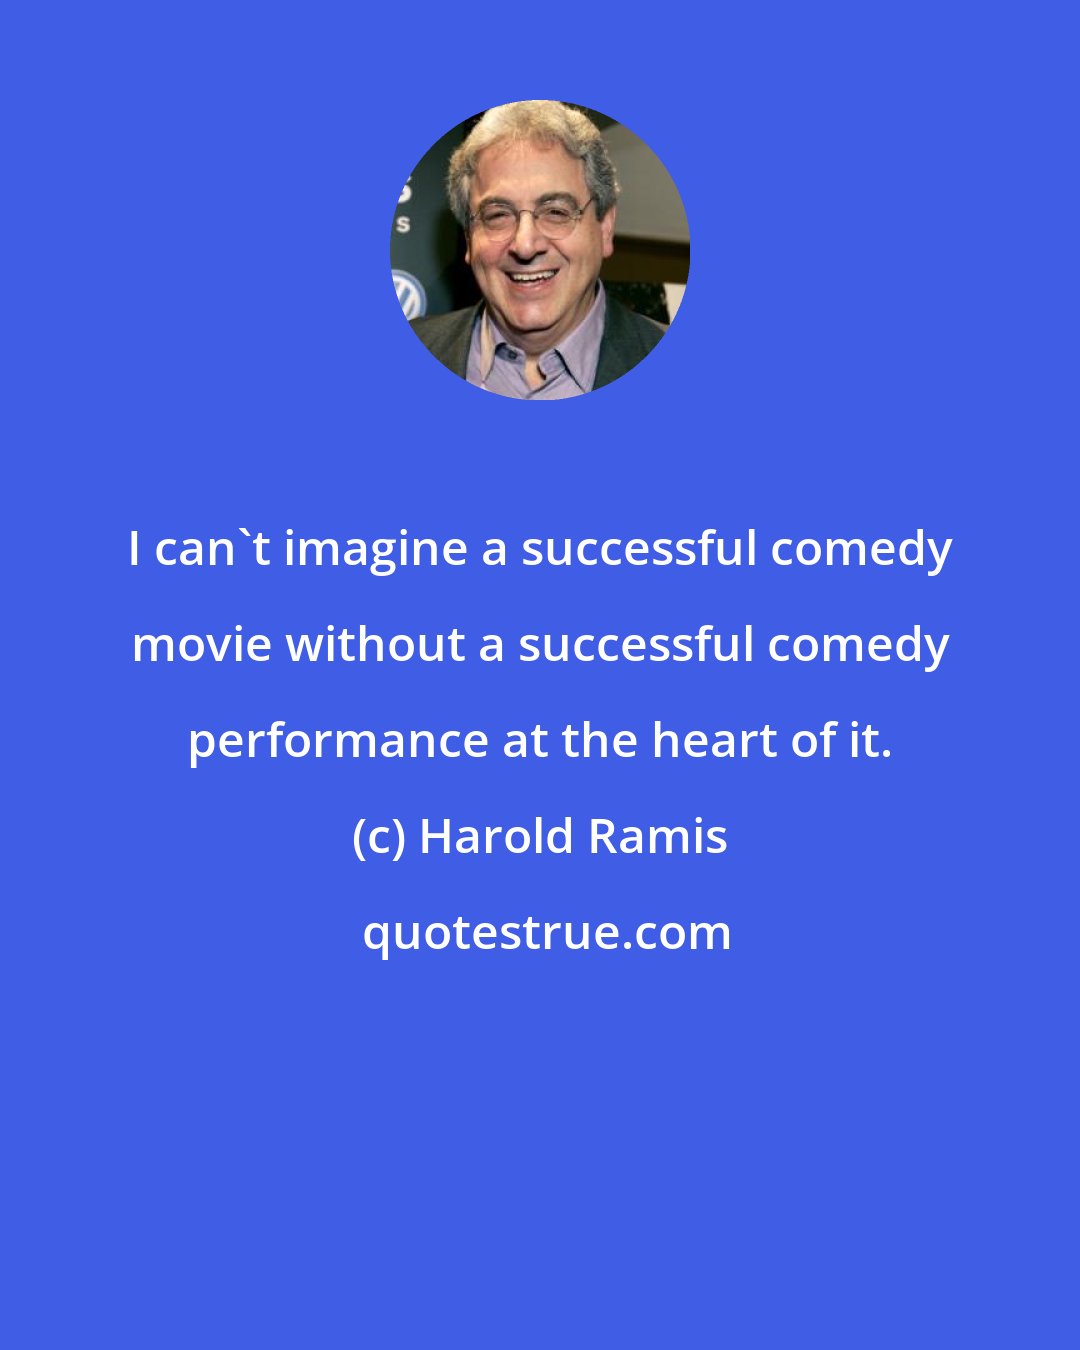 Harold Ramis: I can't imagine a successful comedy movie without a successful comedy performance at the heart of it.